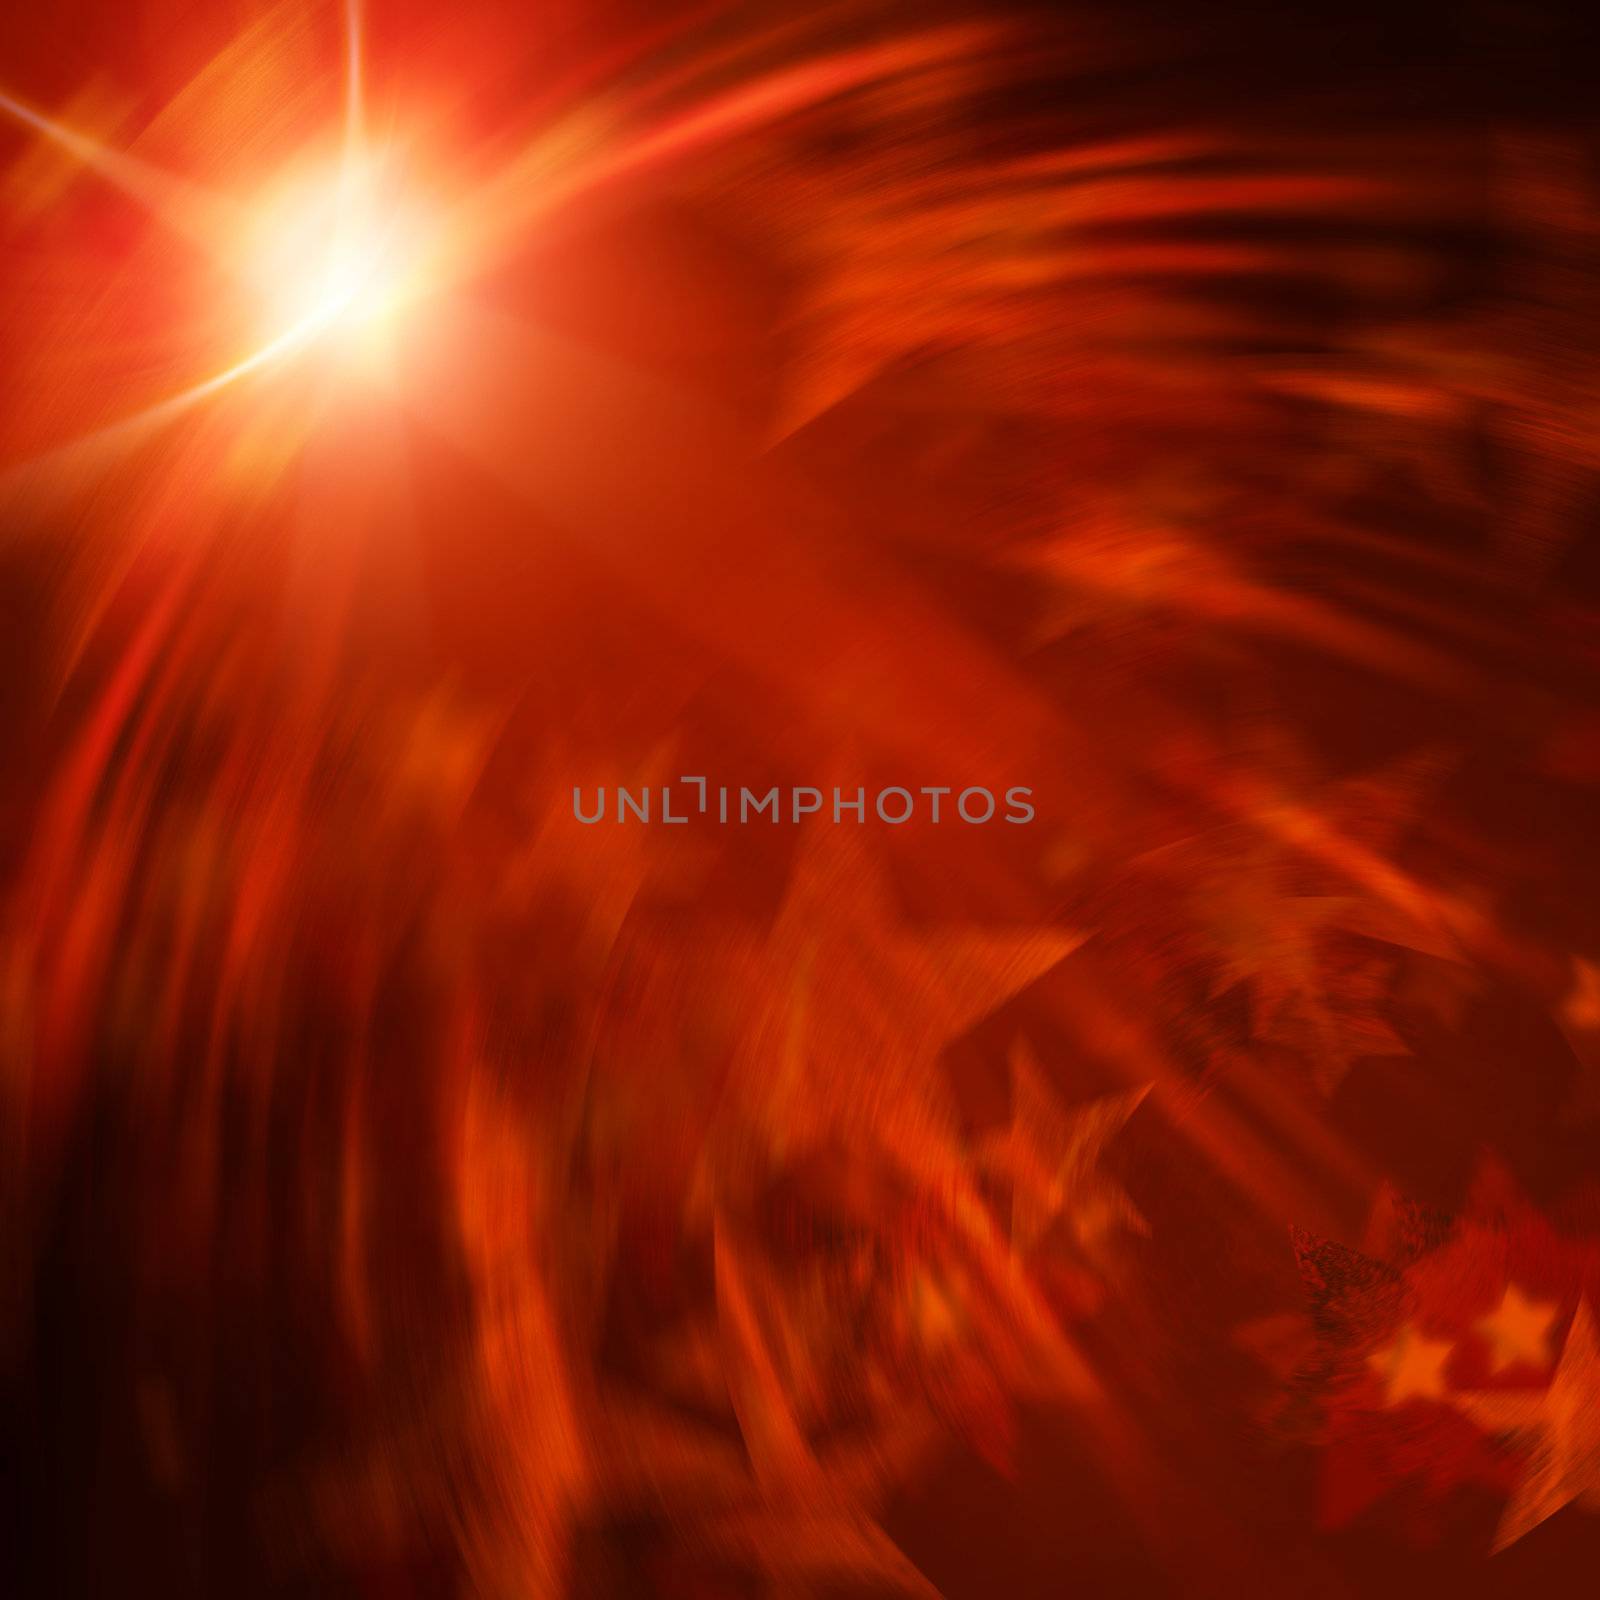 abstract orange rays lights with stars over dark background
